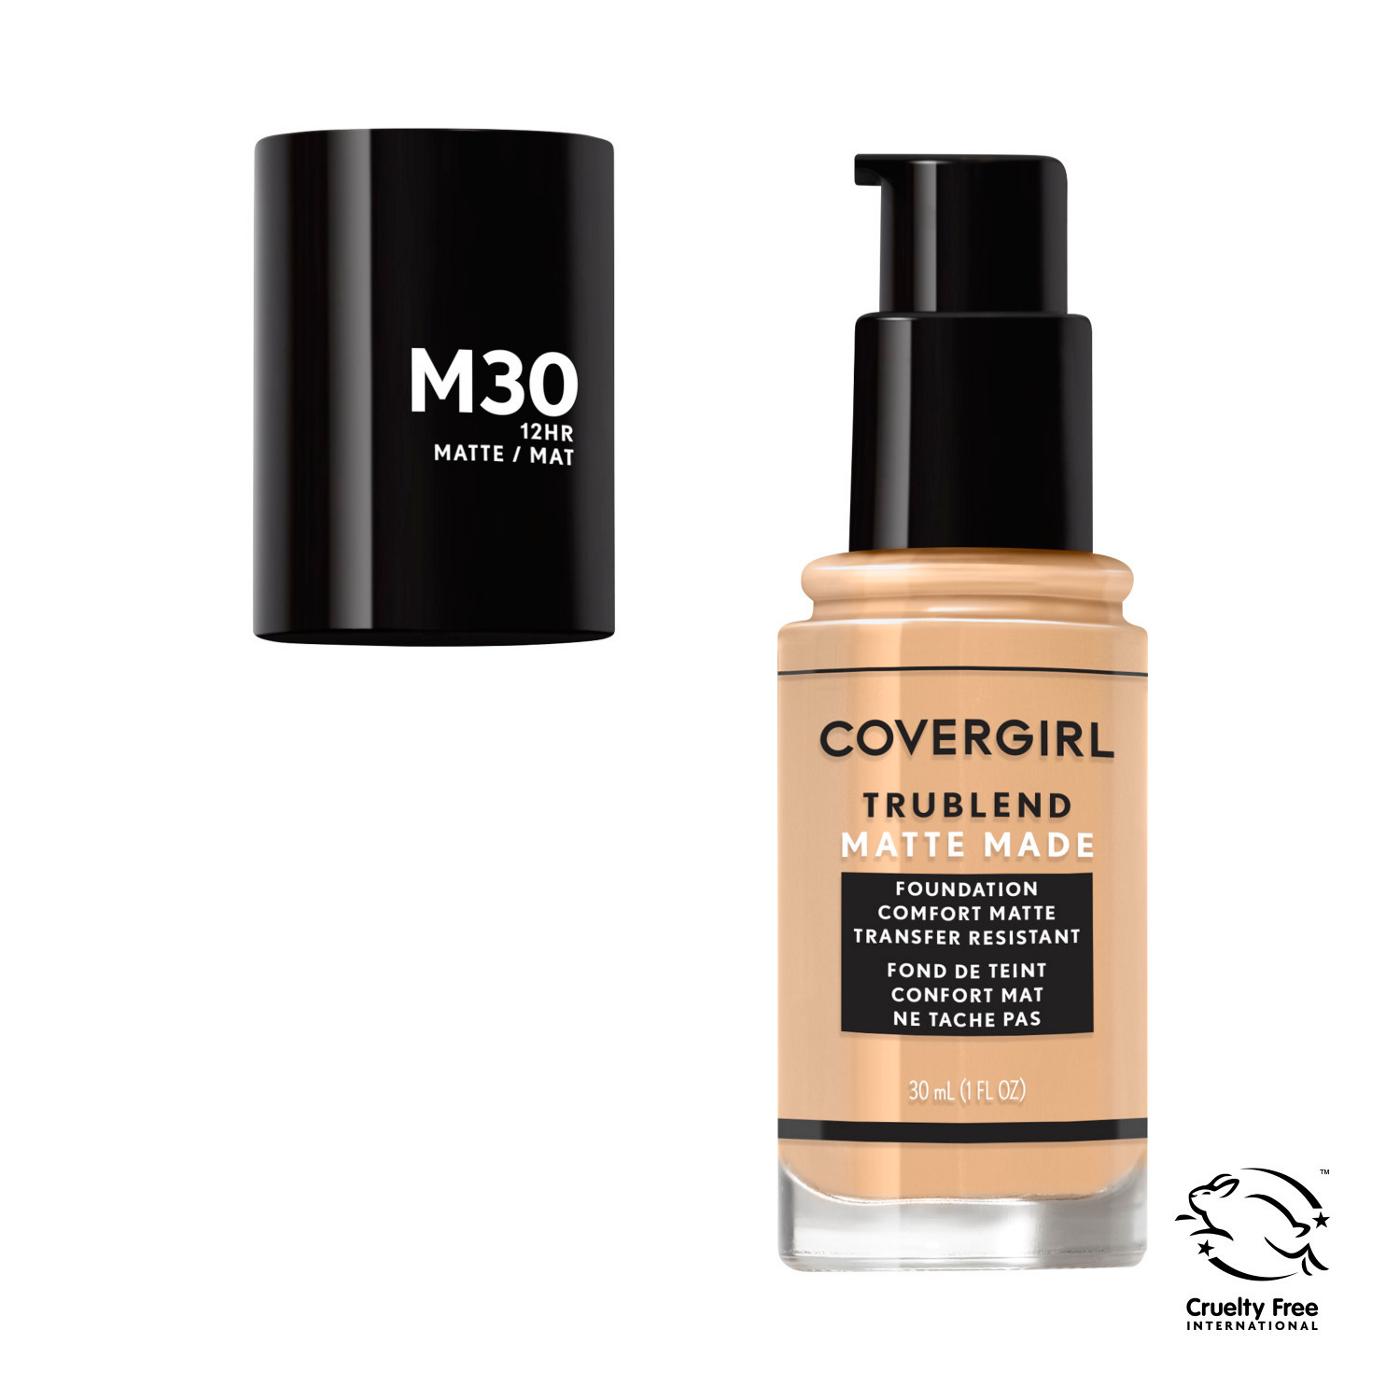 Covergirl TruBlend Matte Made Foundation M30 Honey; image 4 of 11